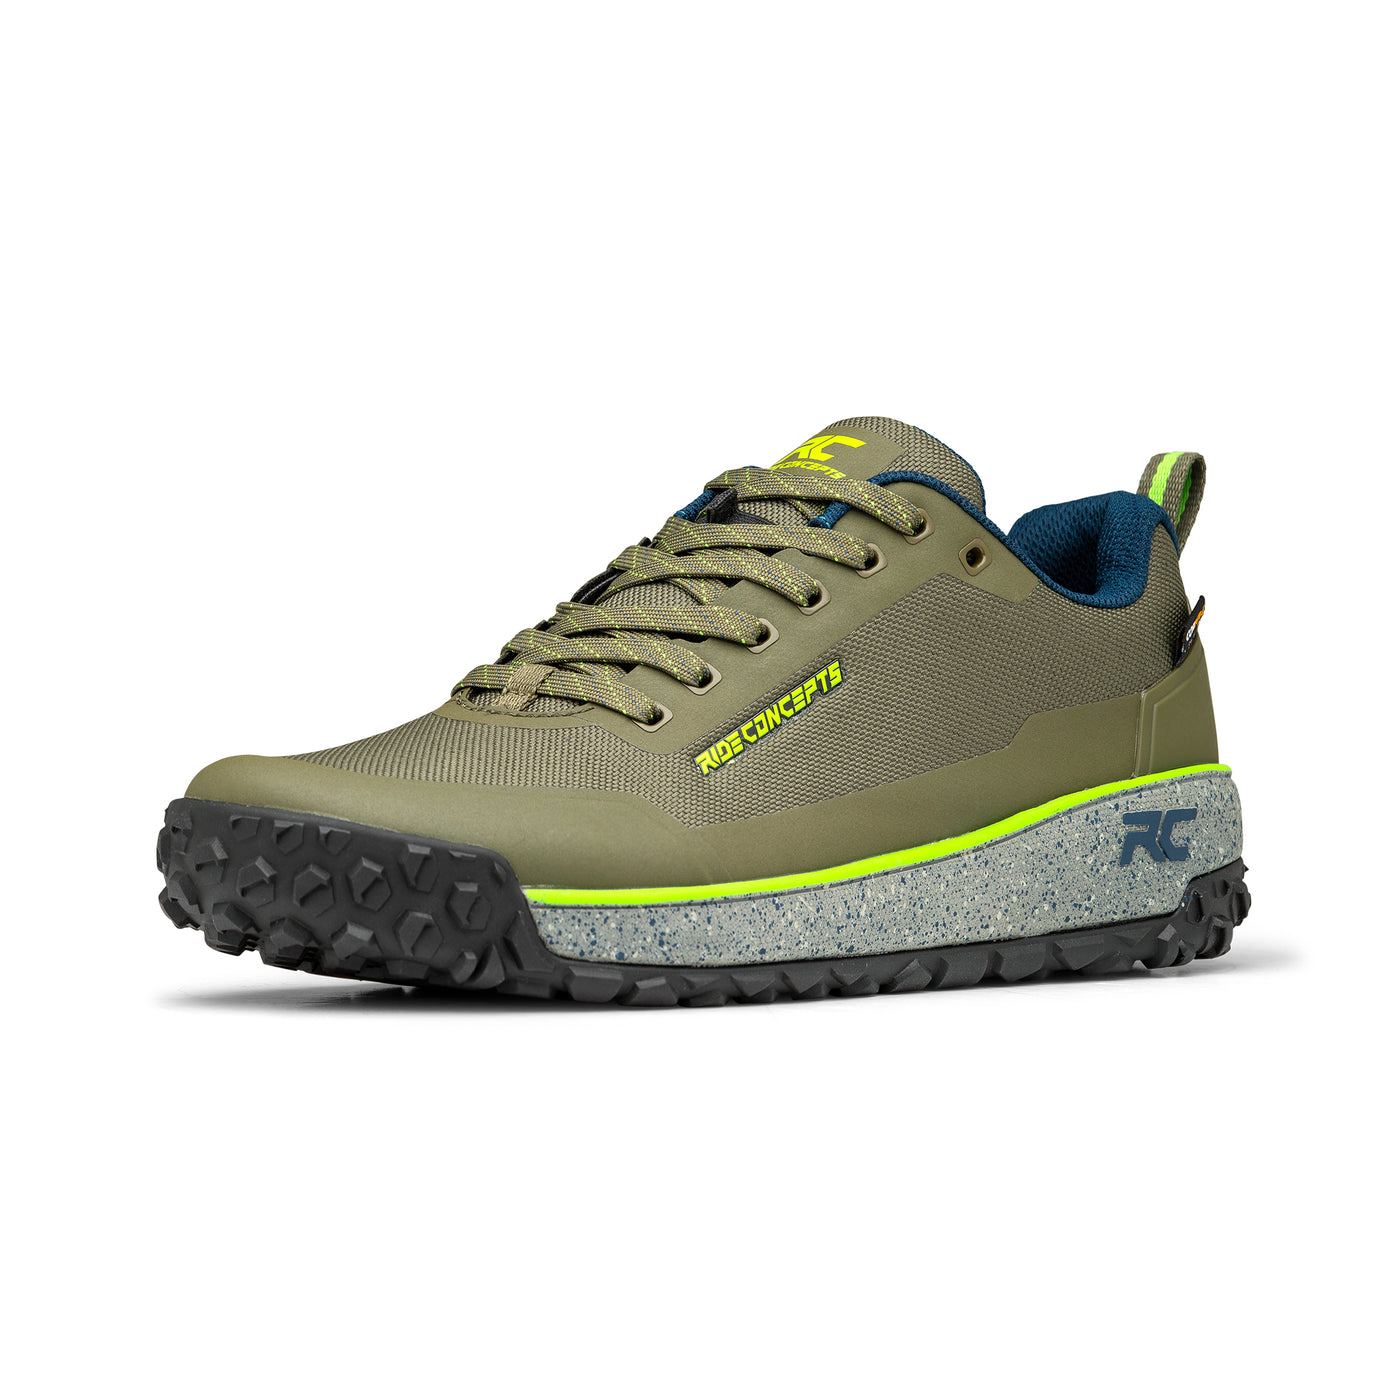 Ride Concepts Men's Tallac MTB Shoe - Olive Lime